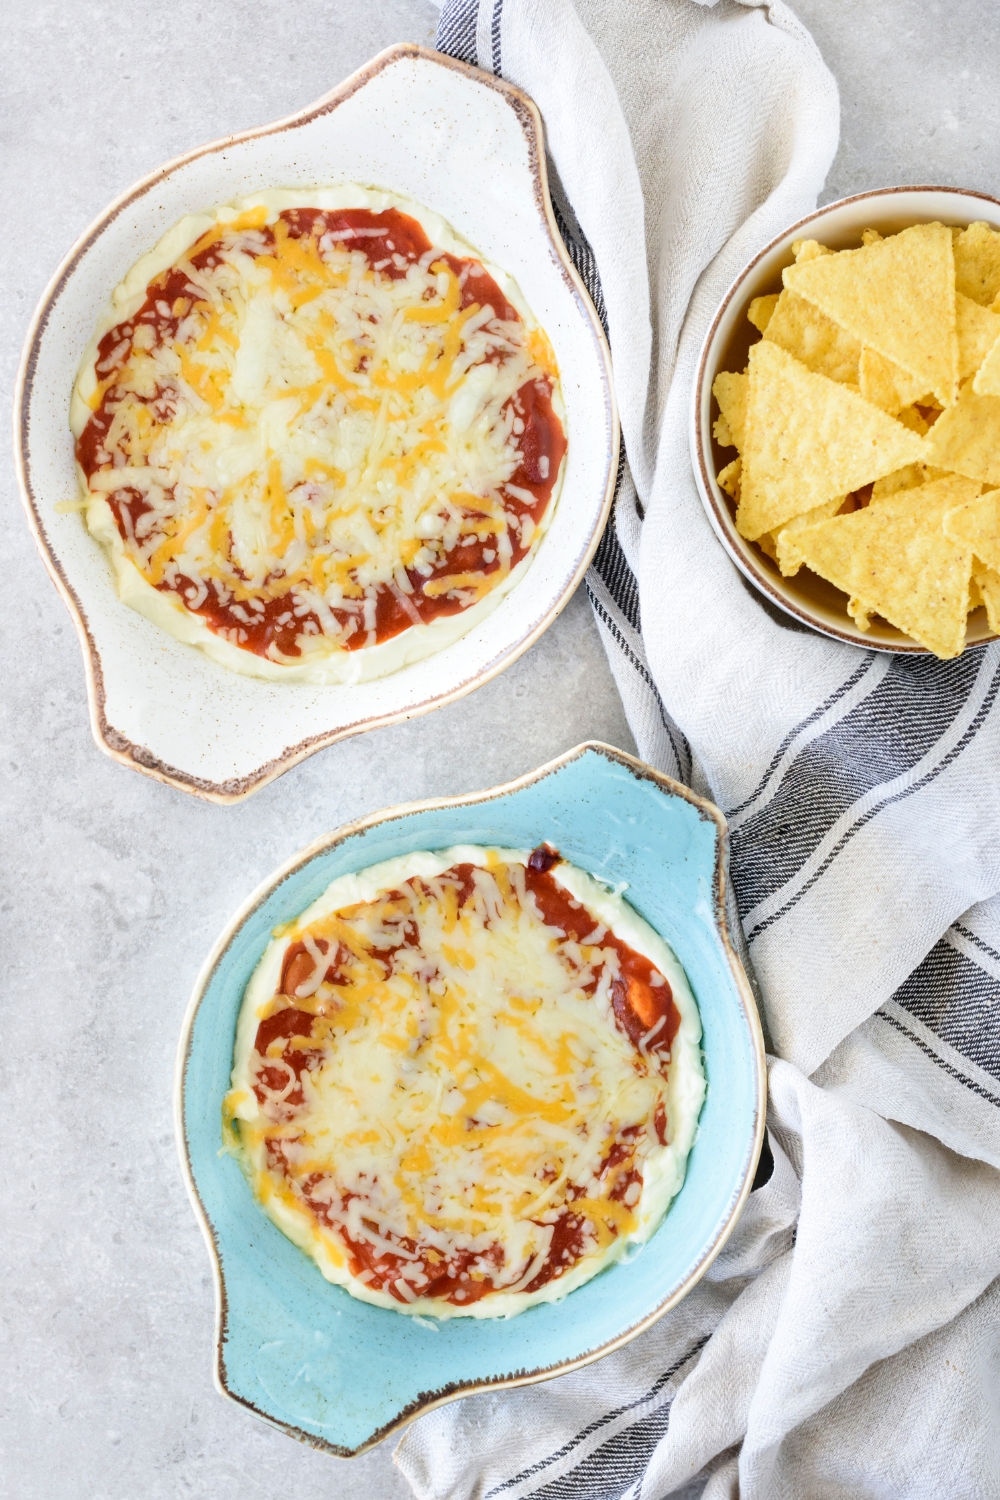 Two baking dishes filled with freshly baked chili cheese dip covered in melted cheese. There is a bowl of corn chips next to the bowls of dip.